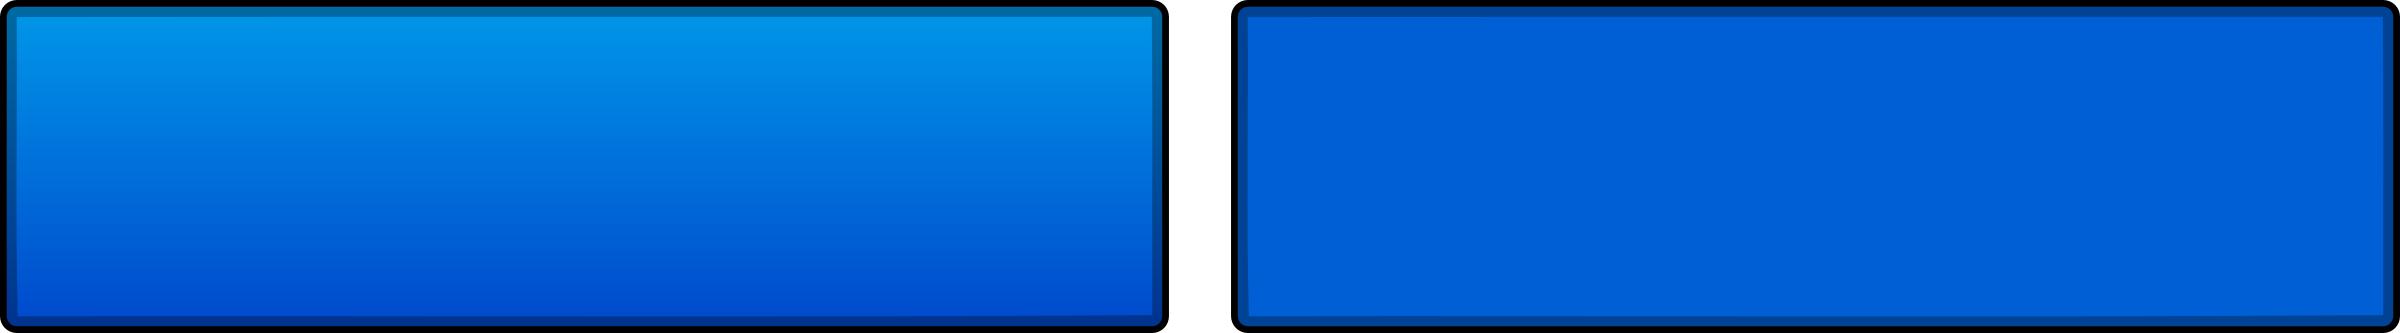 Blue Interface Buttons png